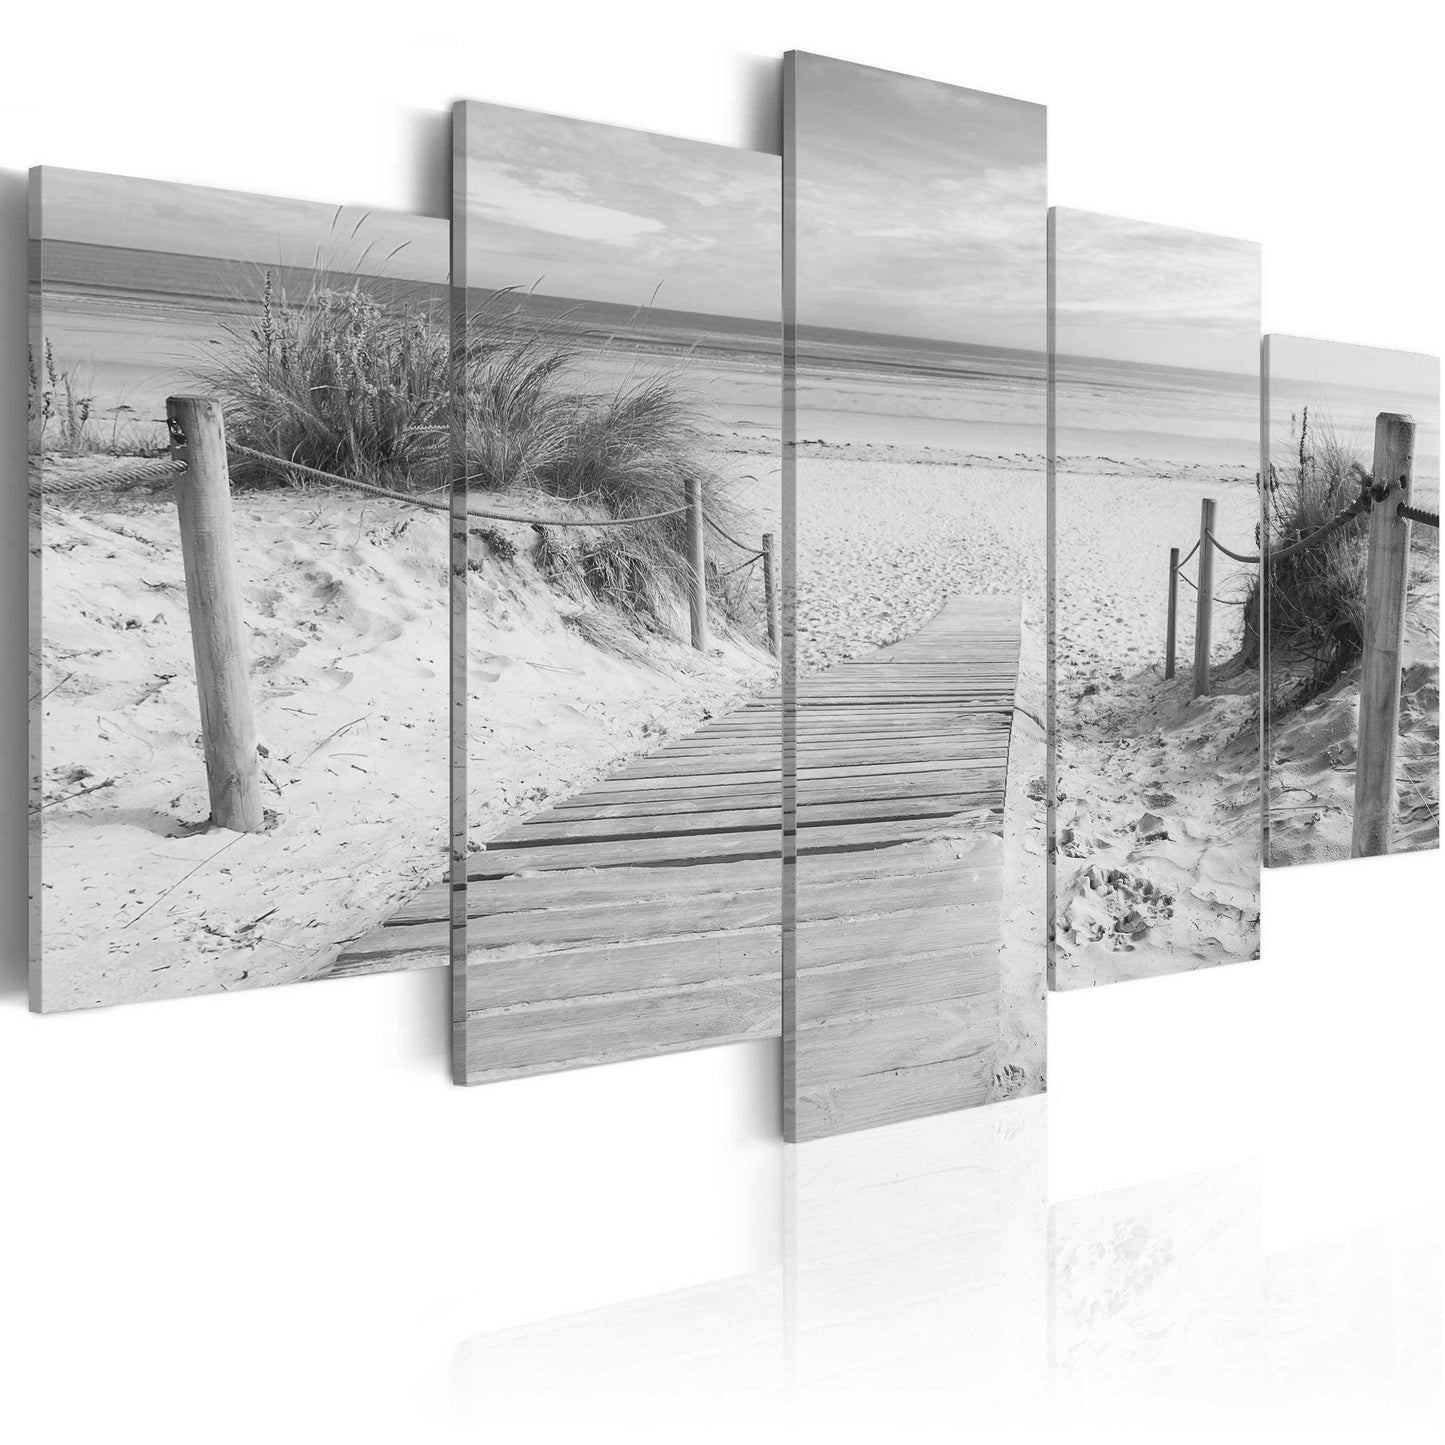 Canvas Print - Morning on the beach - black and white - www.trendingbestsellers.com